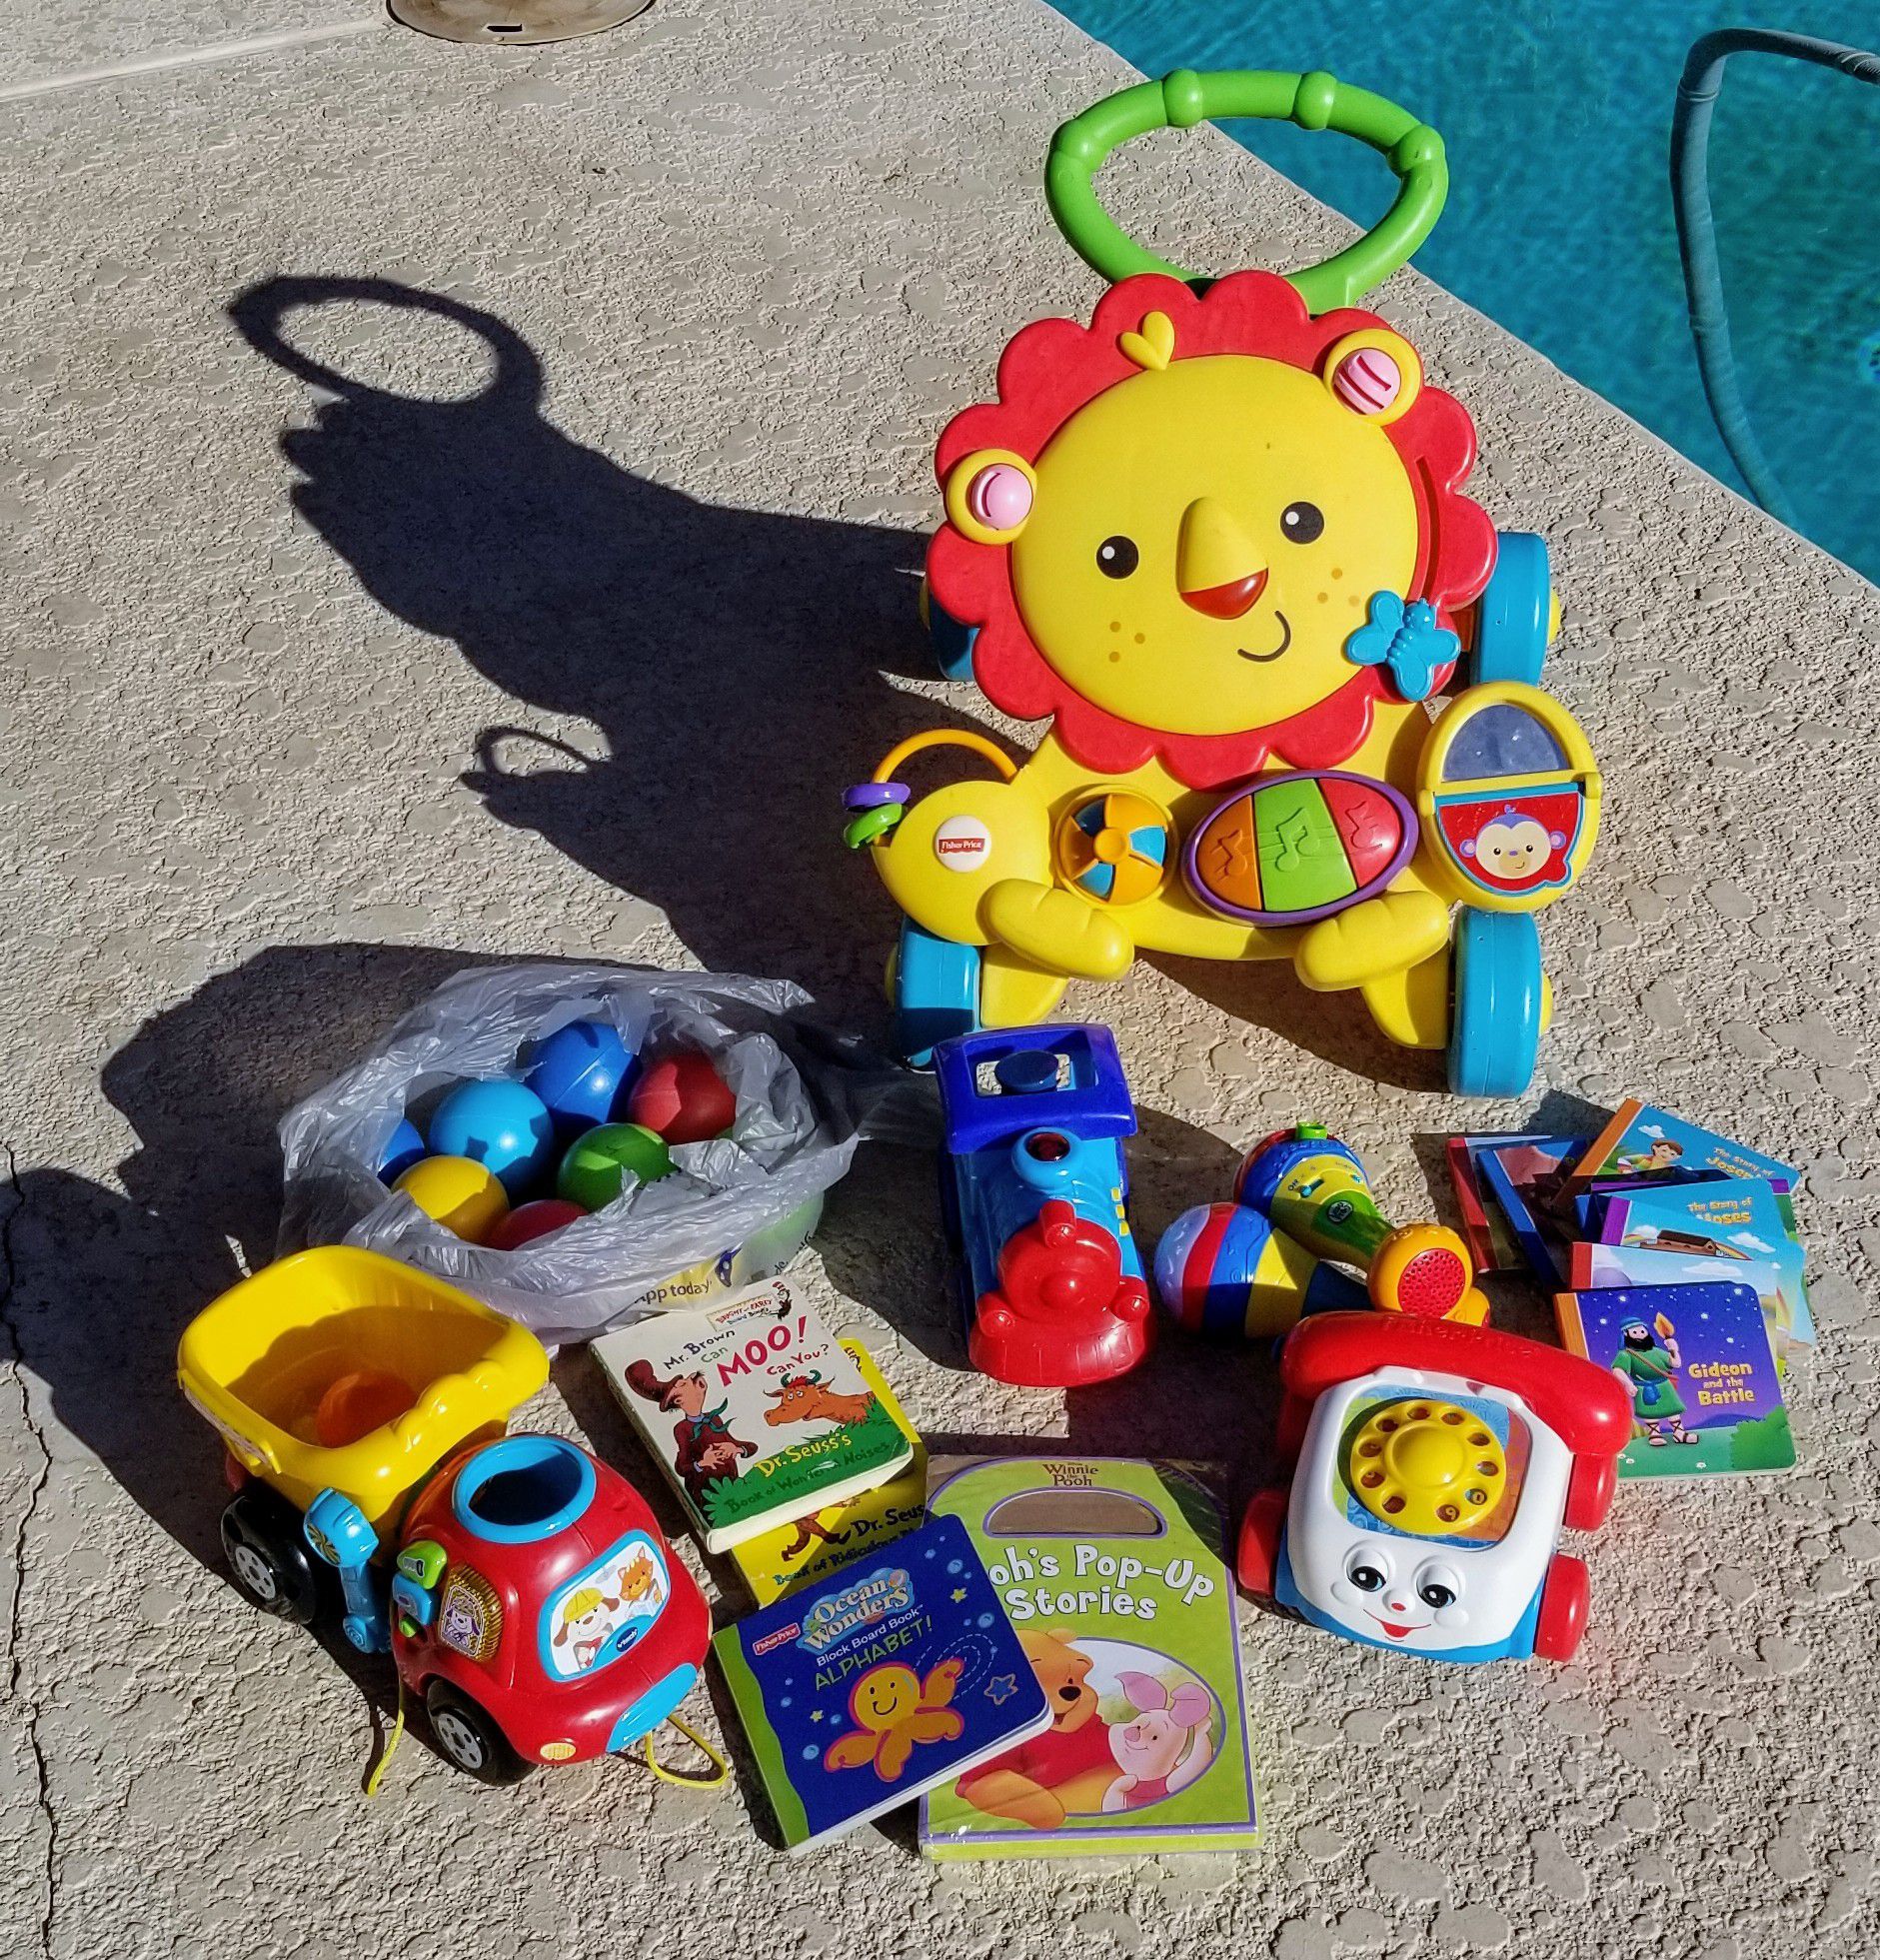 Misc Toddler Toys and Books